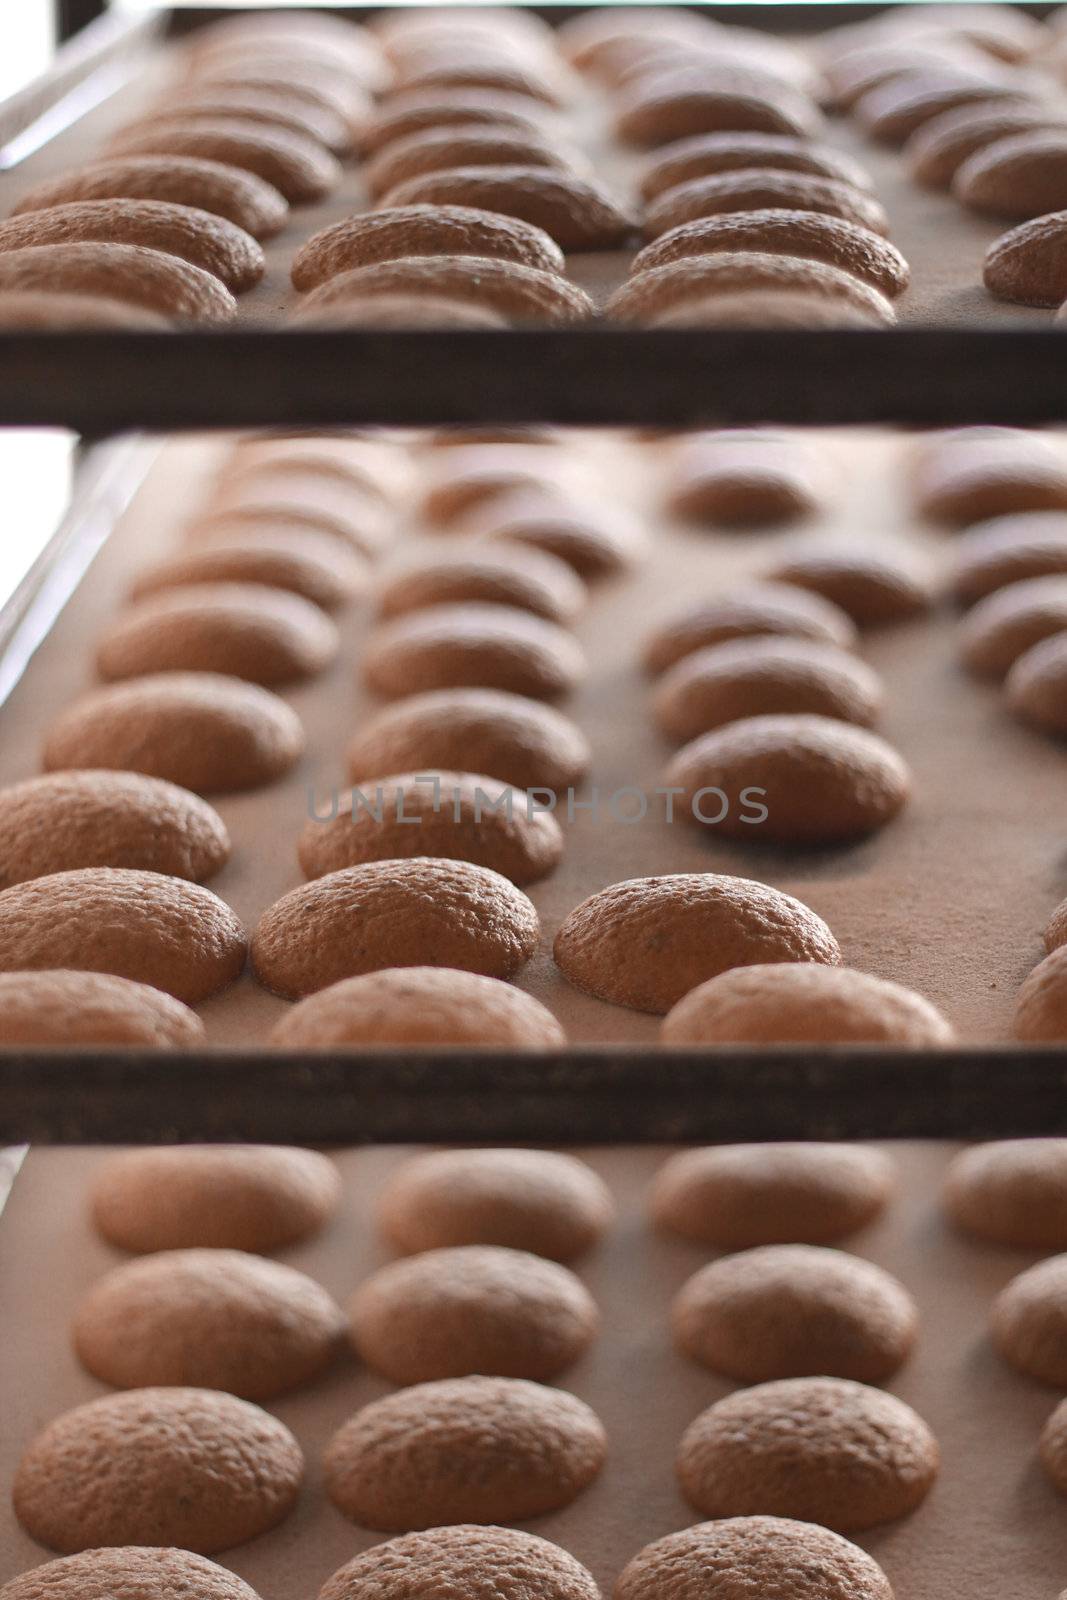 Cookies still on the oven tray, just baked at the local Maltese bakery in Mgarr